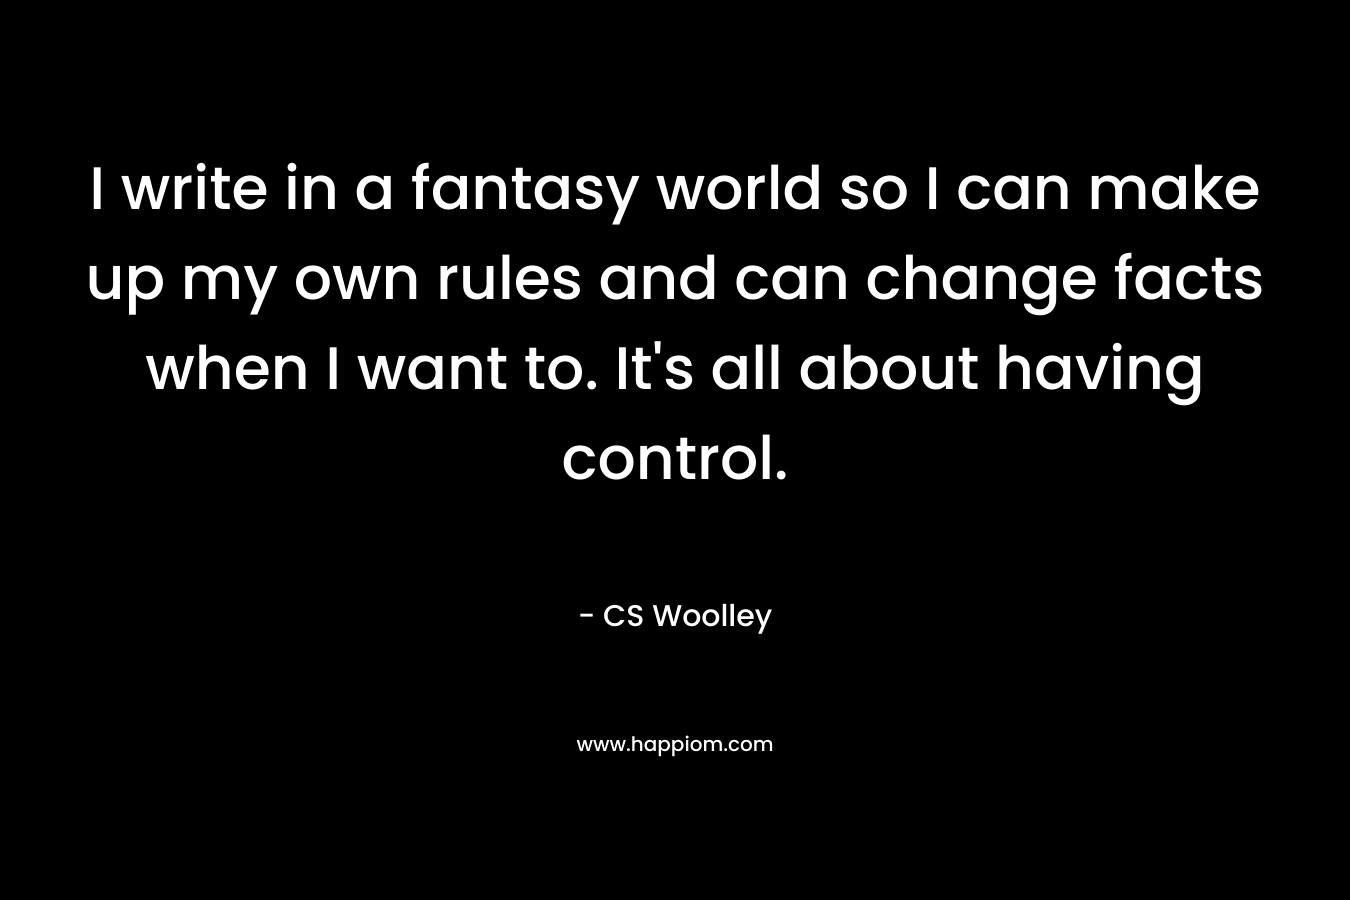 I write in a fantasy world so I can make up my own rules and can change facts when I want to. It's all about having control.